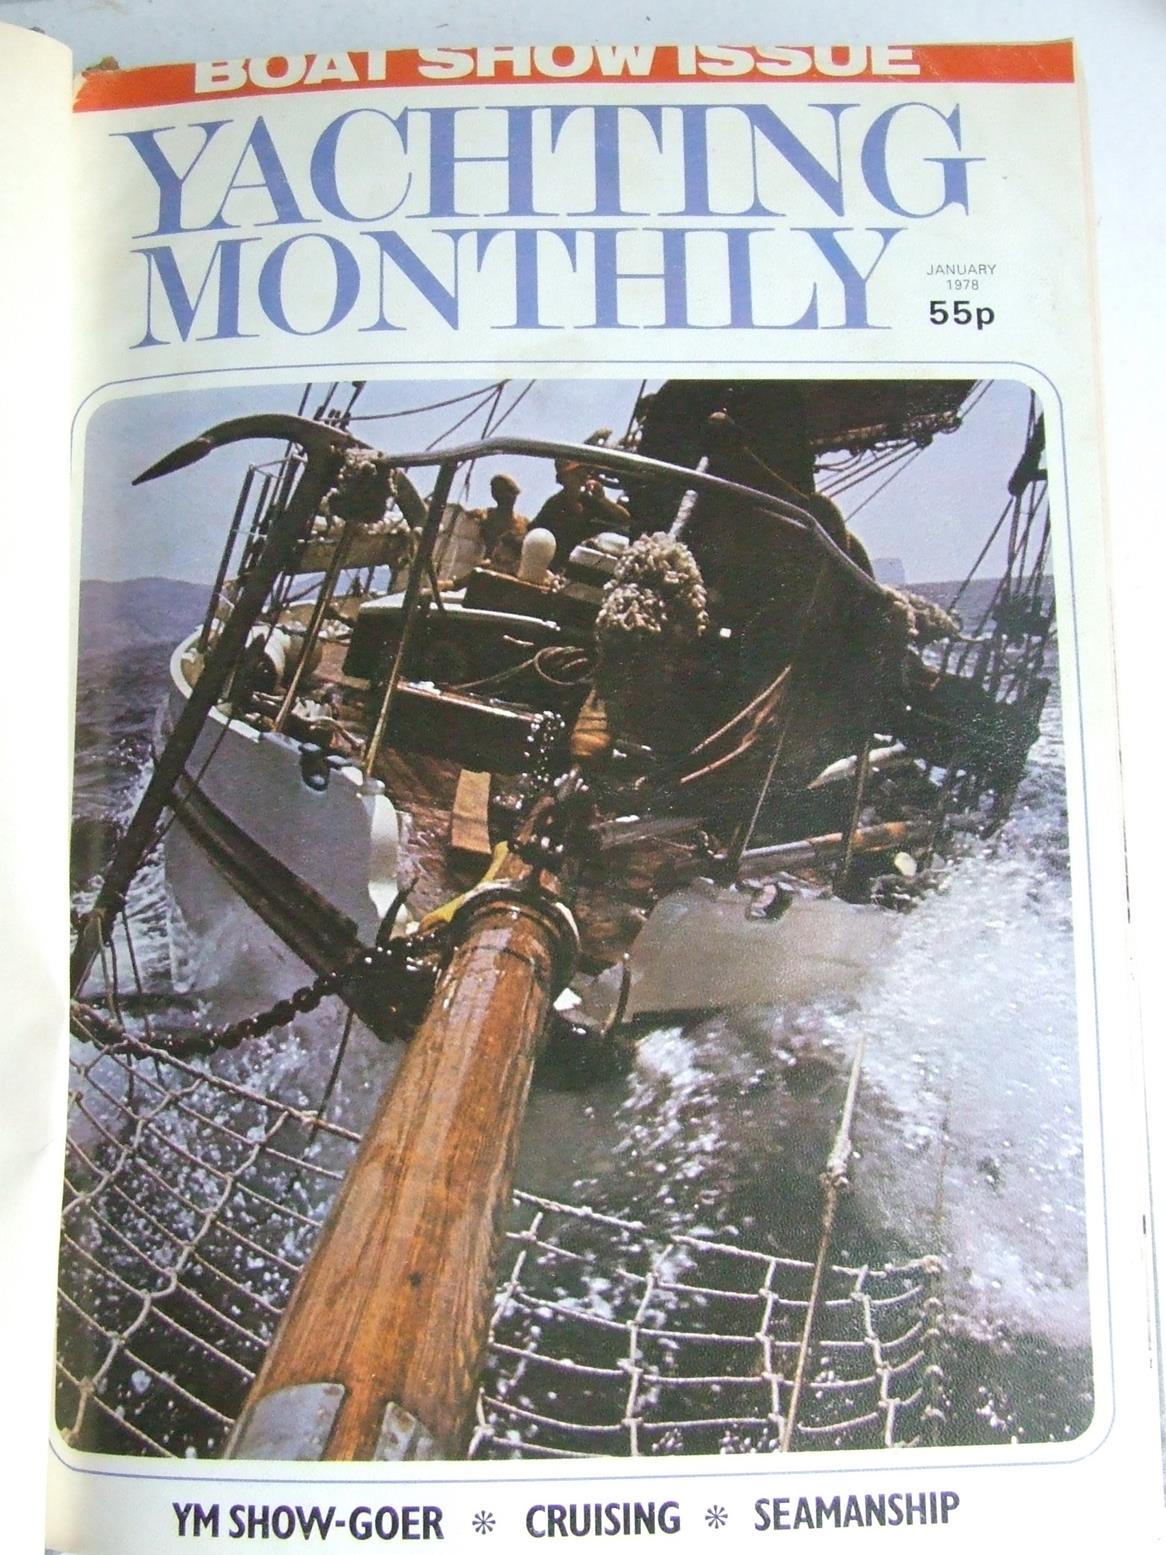 Yachting Monthly volume 138, January - December 1978